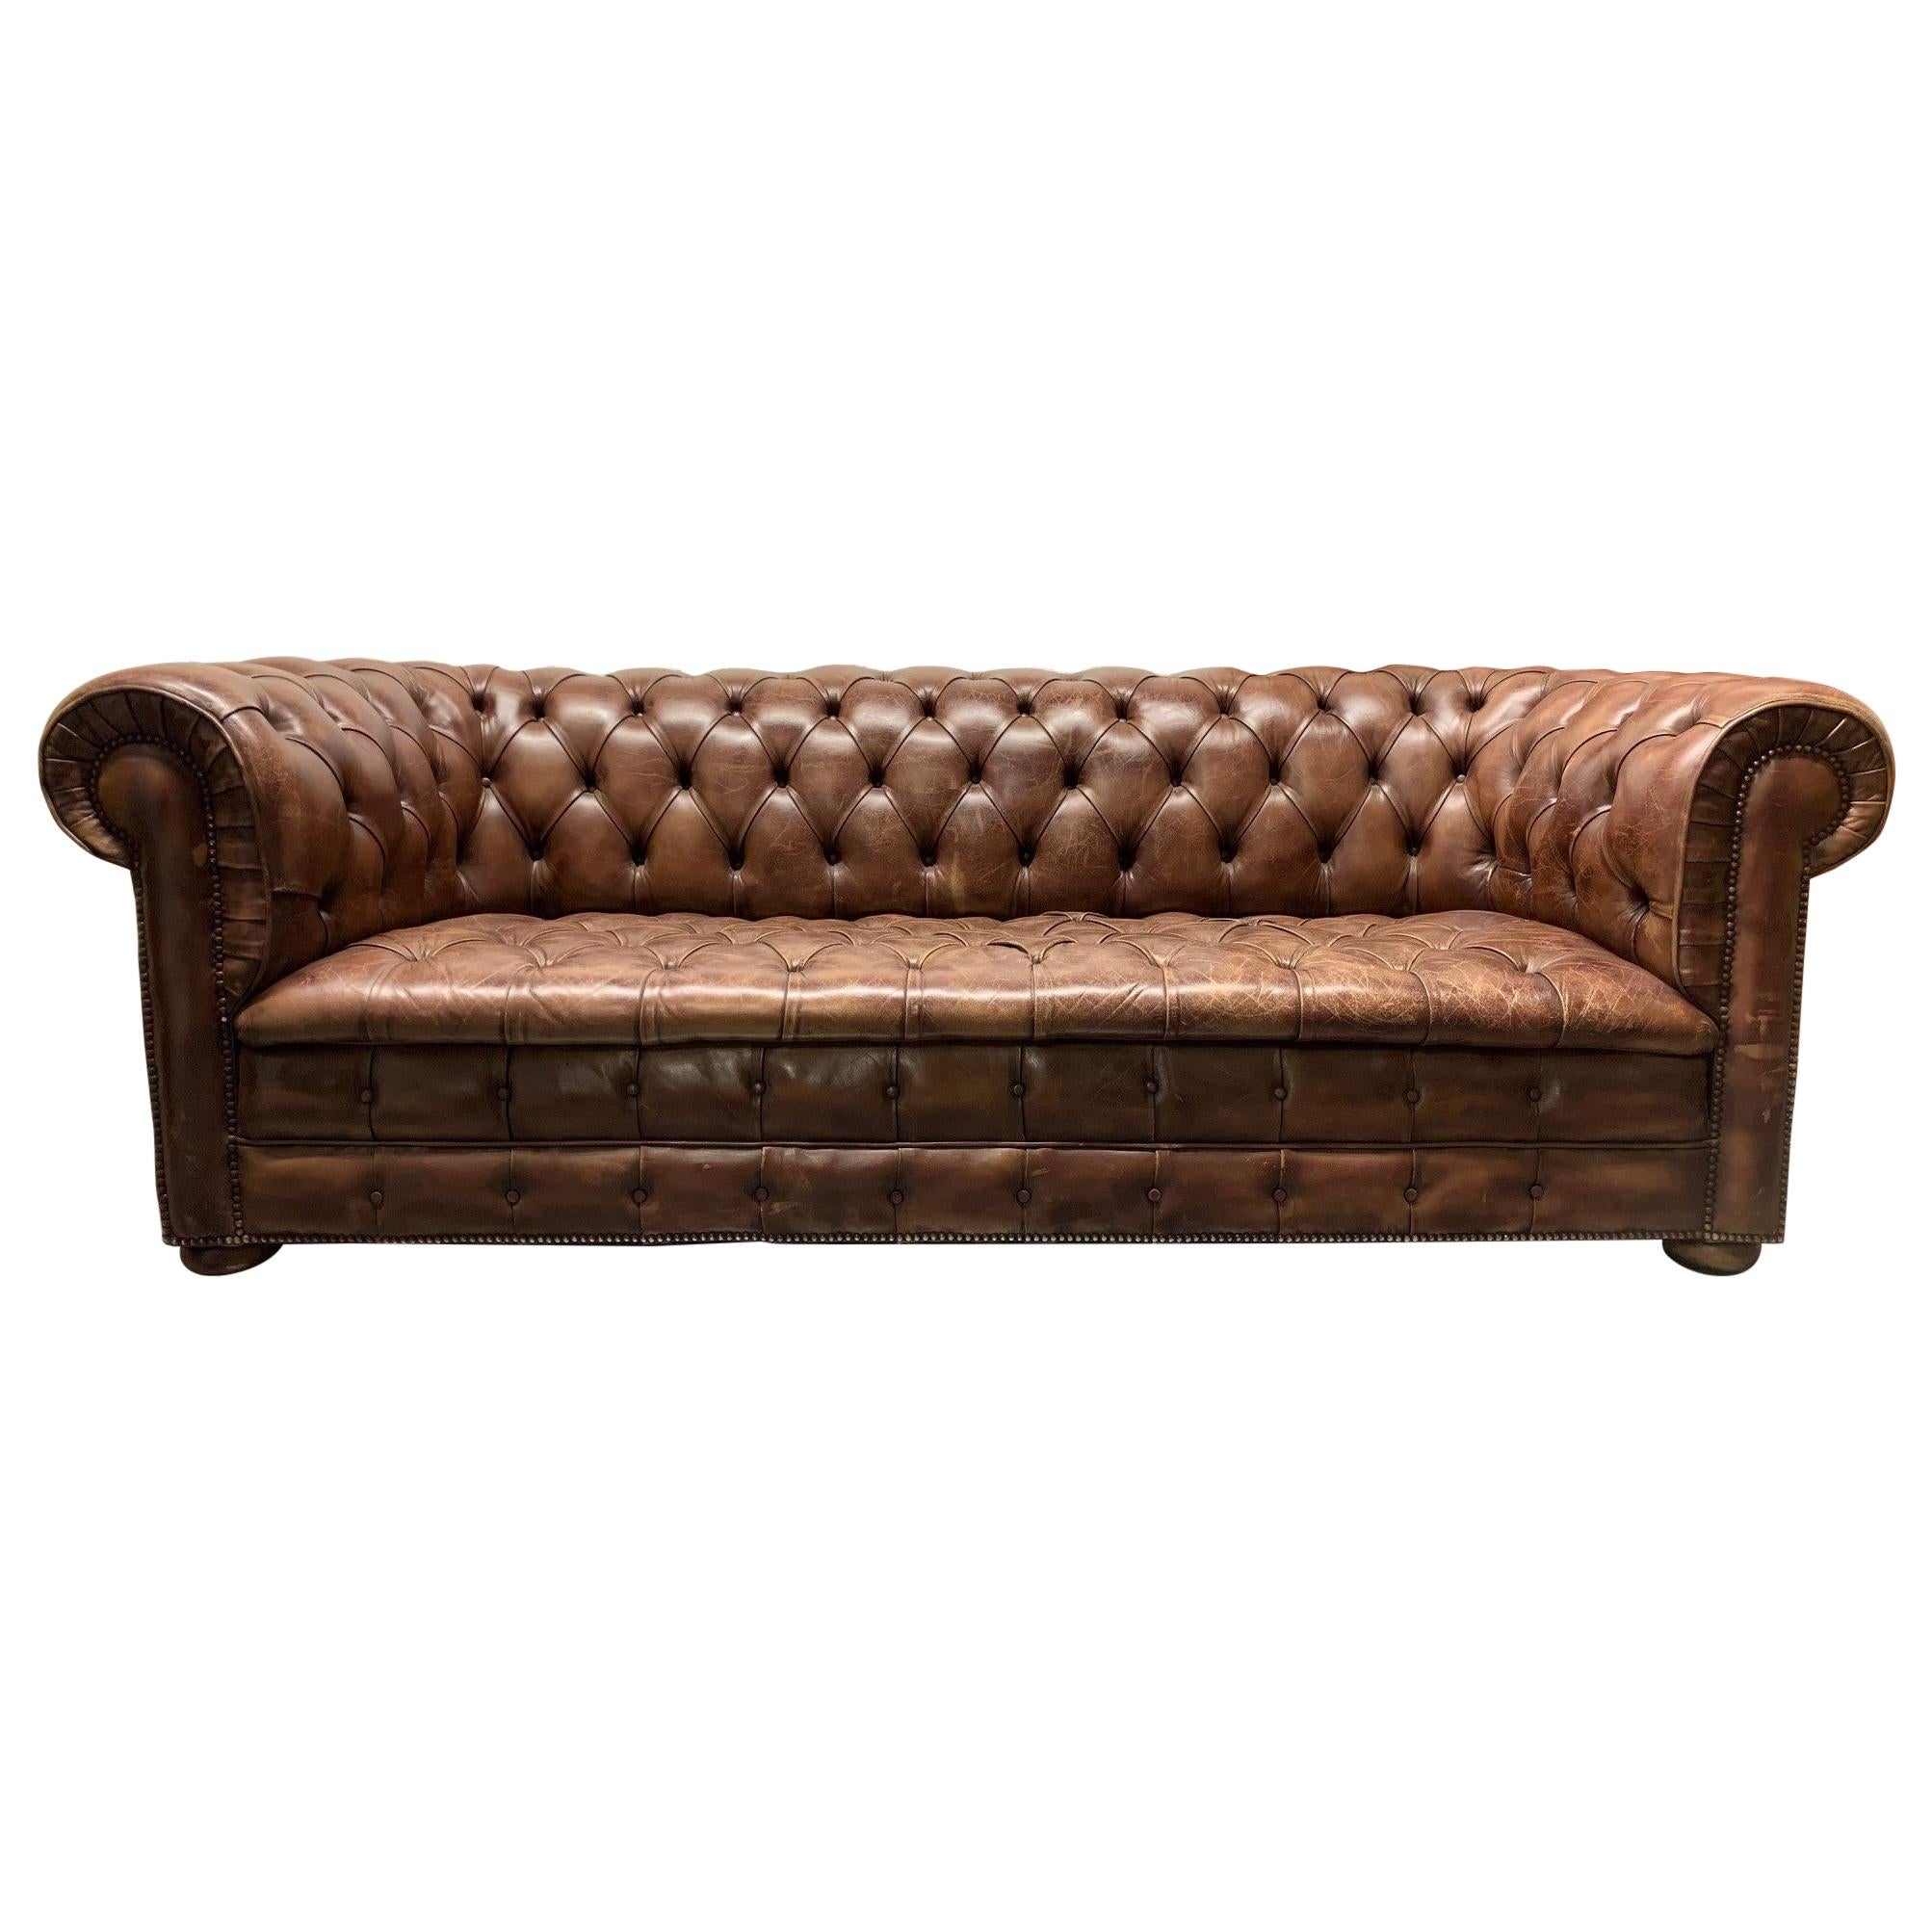 Pair Vintage Tufted Leather, Leather Couch Tufted